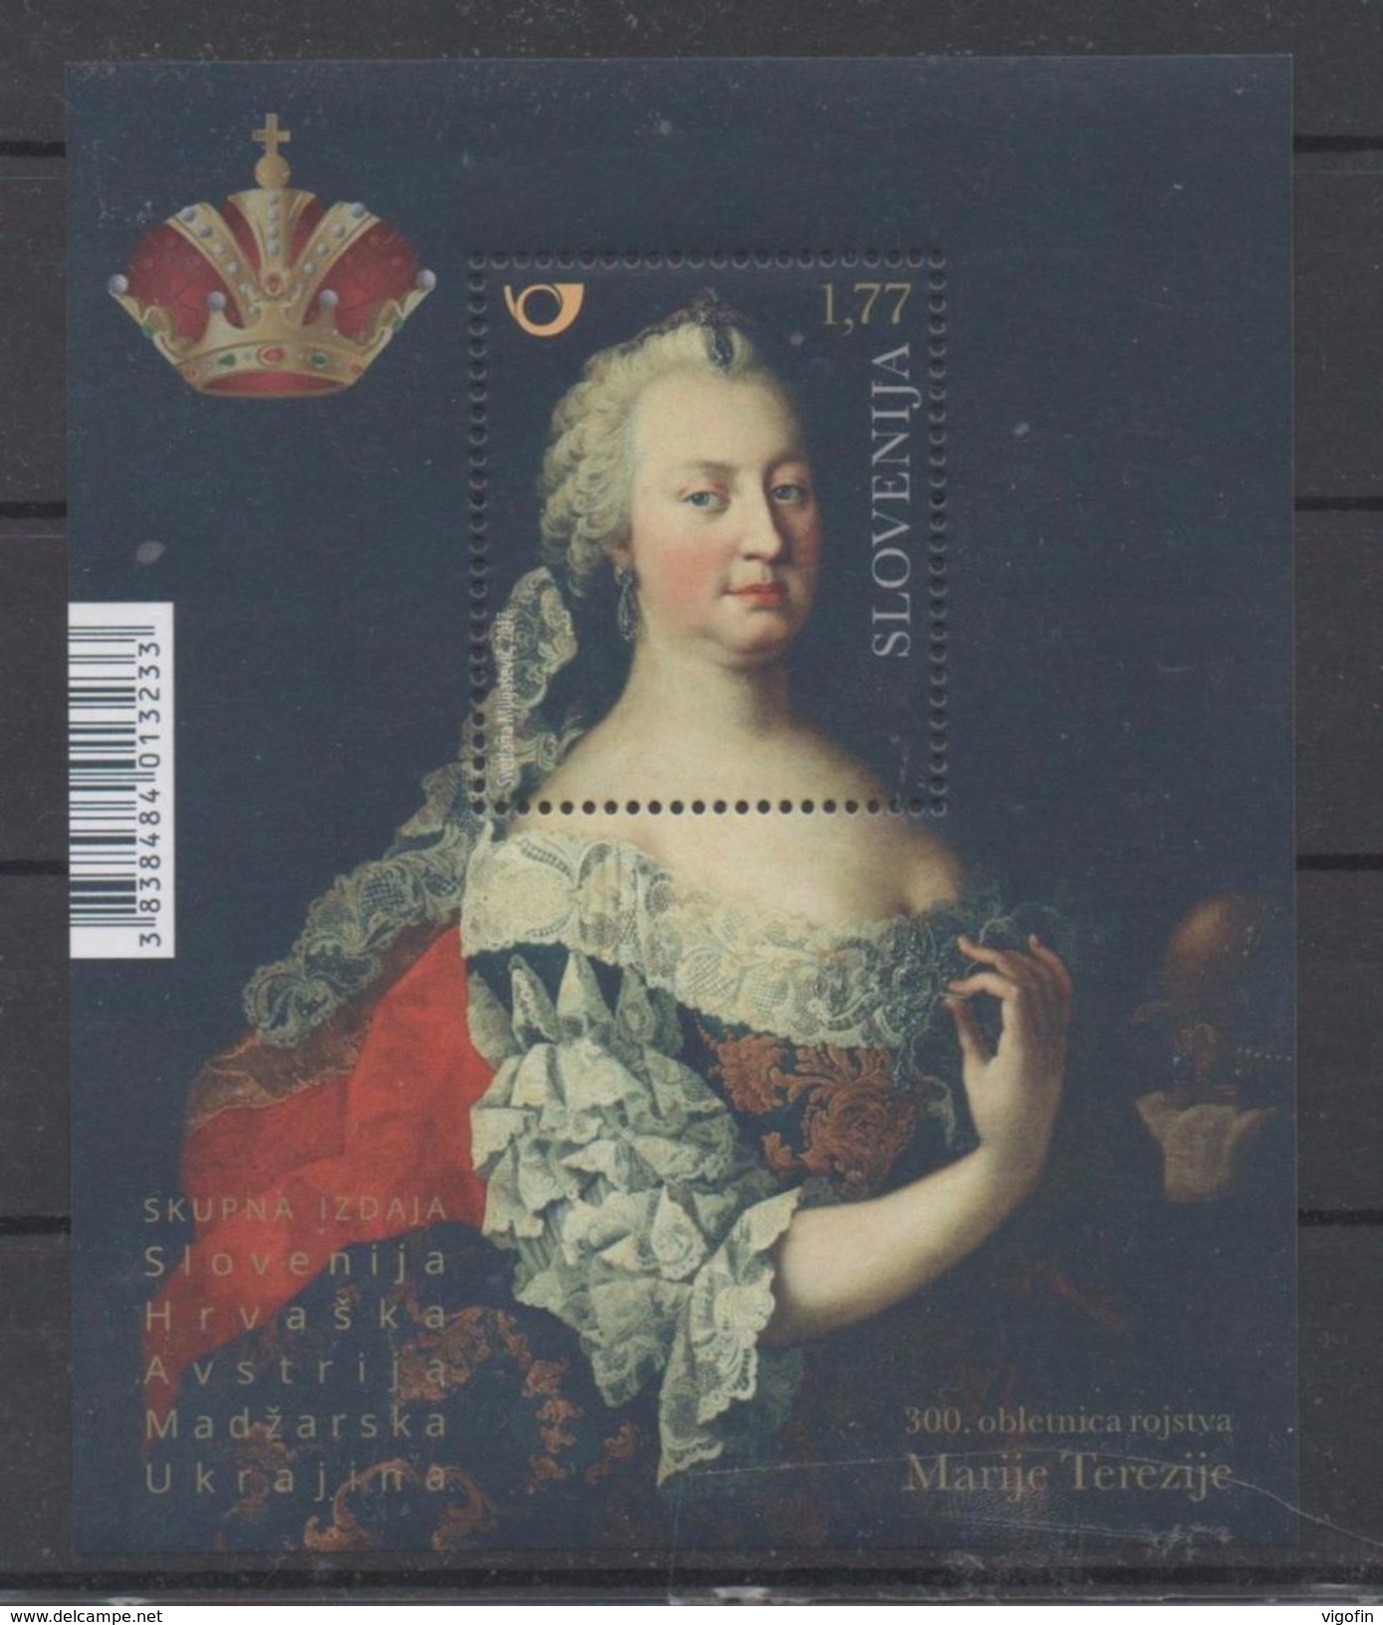 SI 2017-10 300A BIRTH OF MARIA THERESA, SLOVENIA, S/S, MNH - Emissions Communes